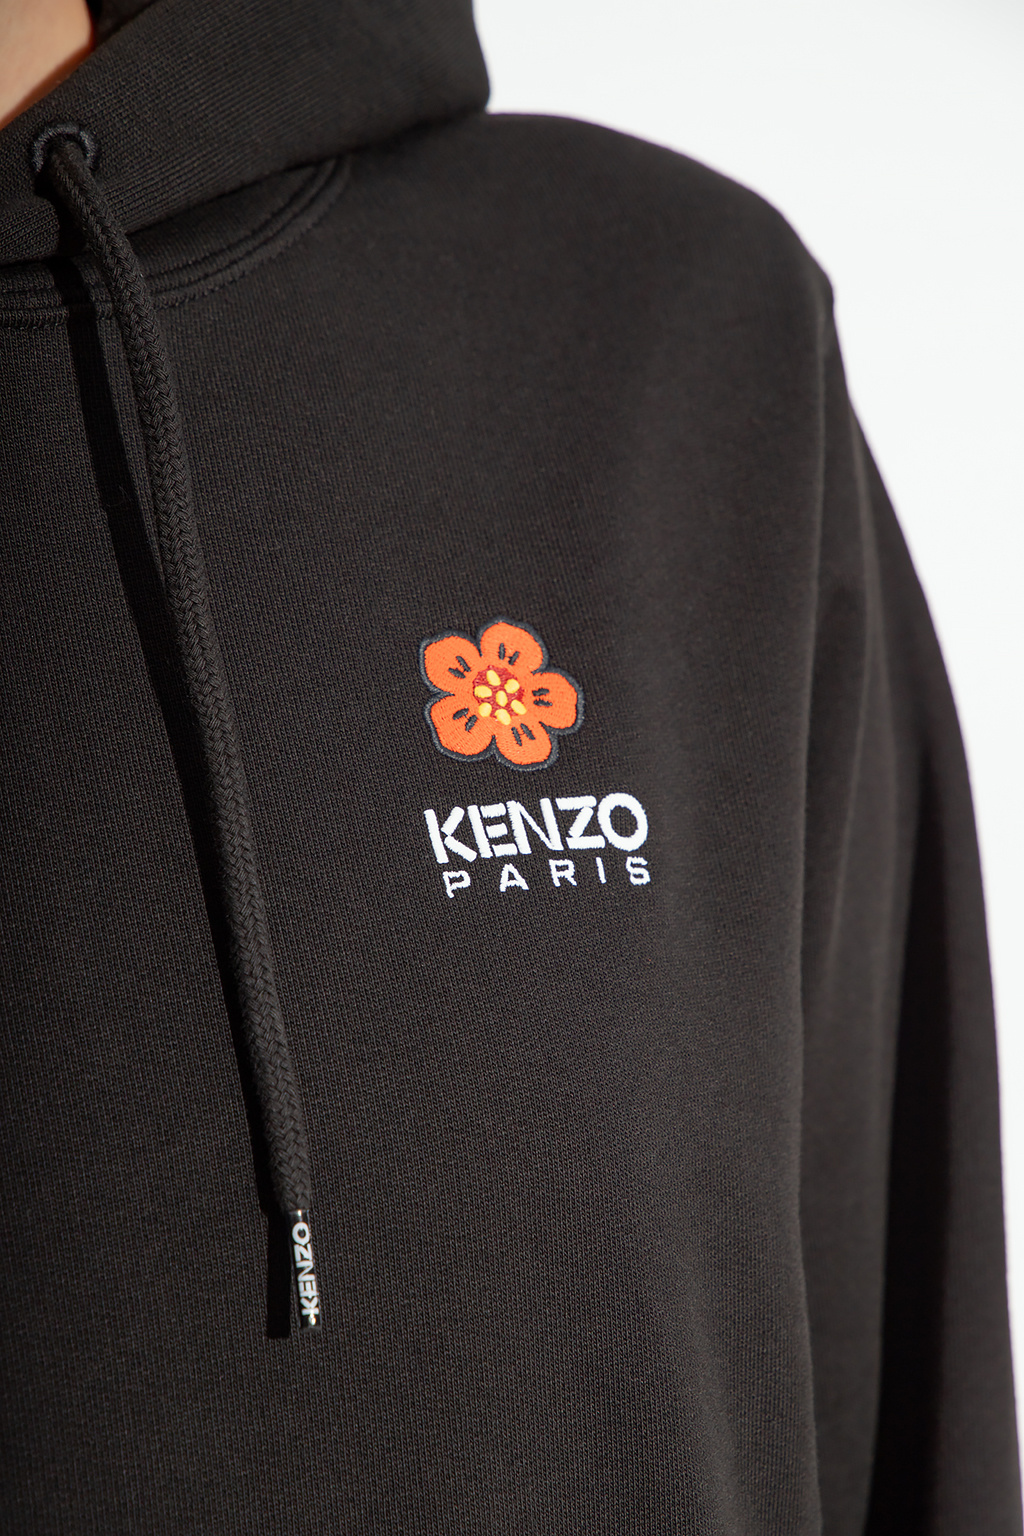 Kenzo Embroidered T-Shirt hoodie